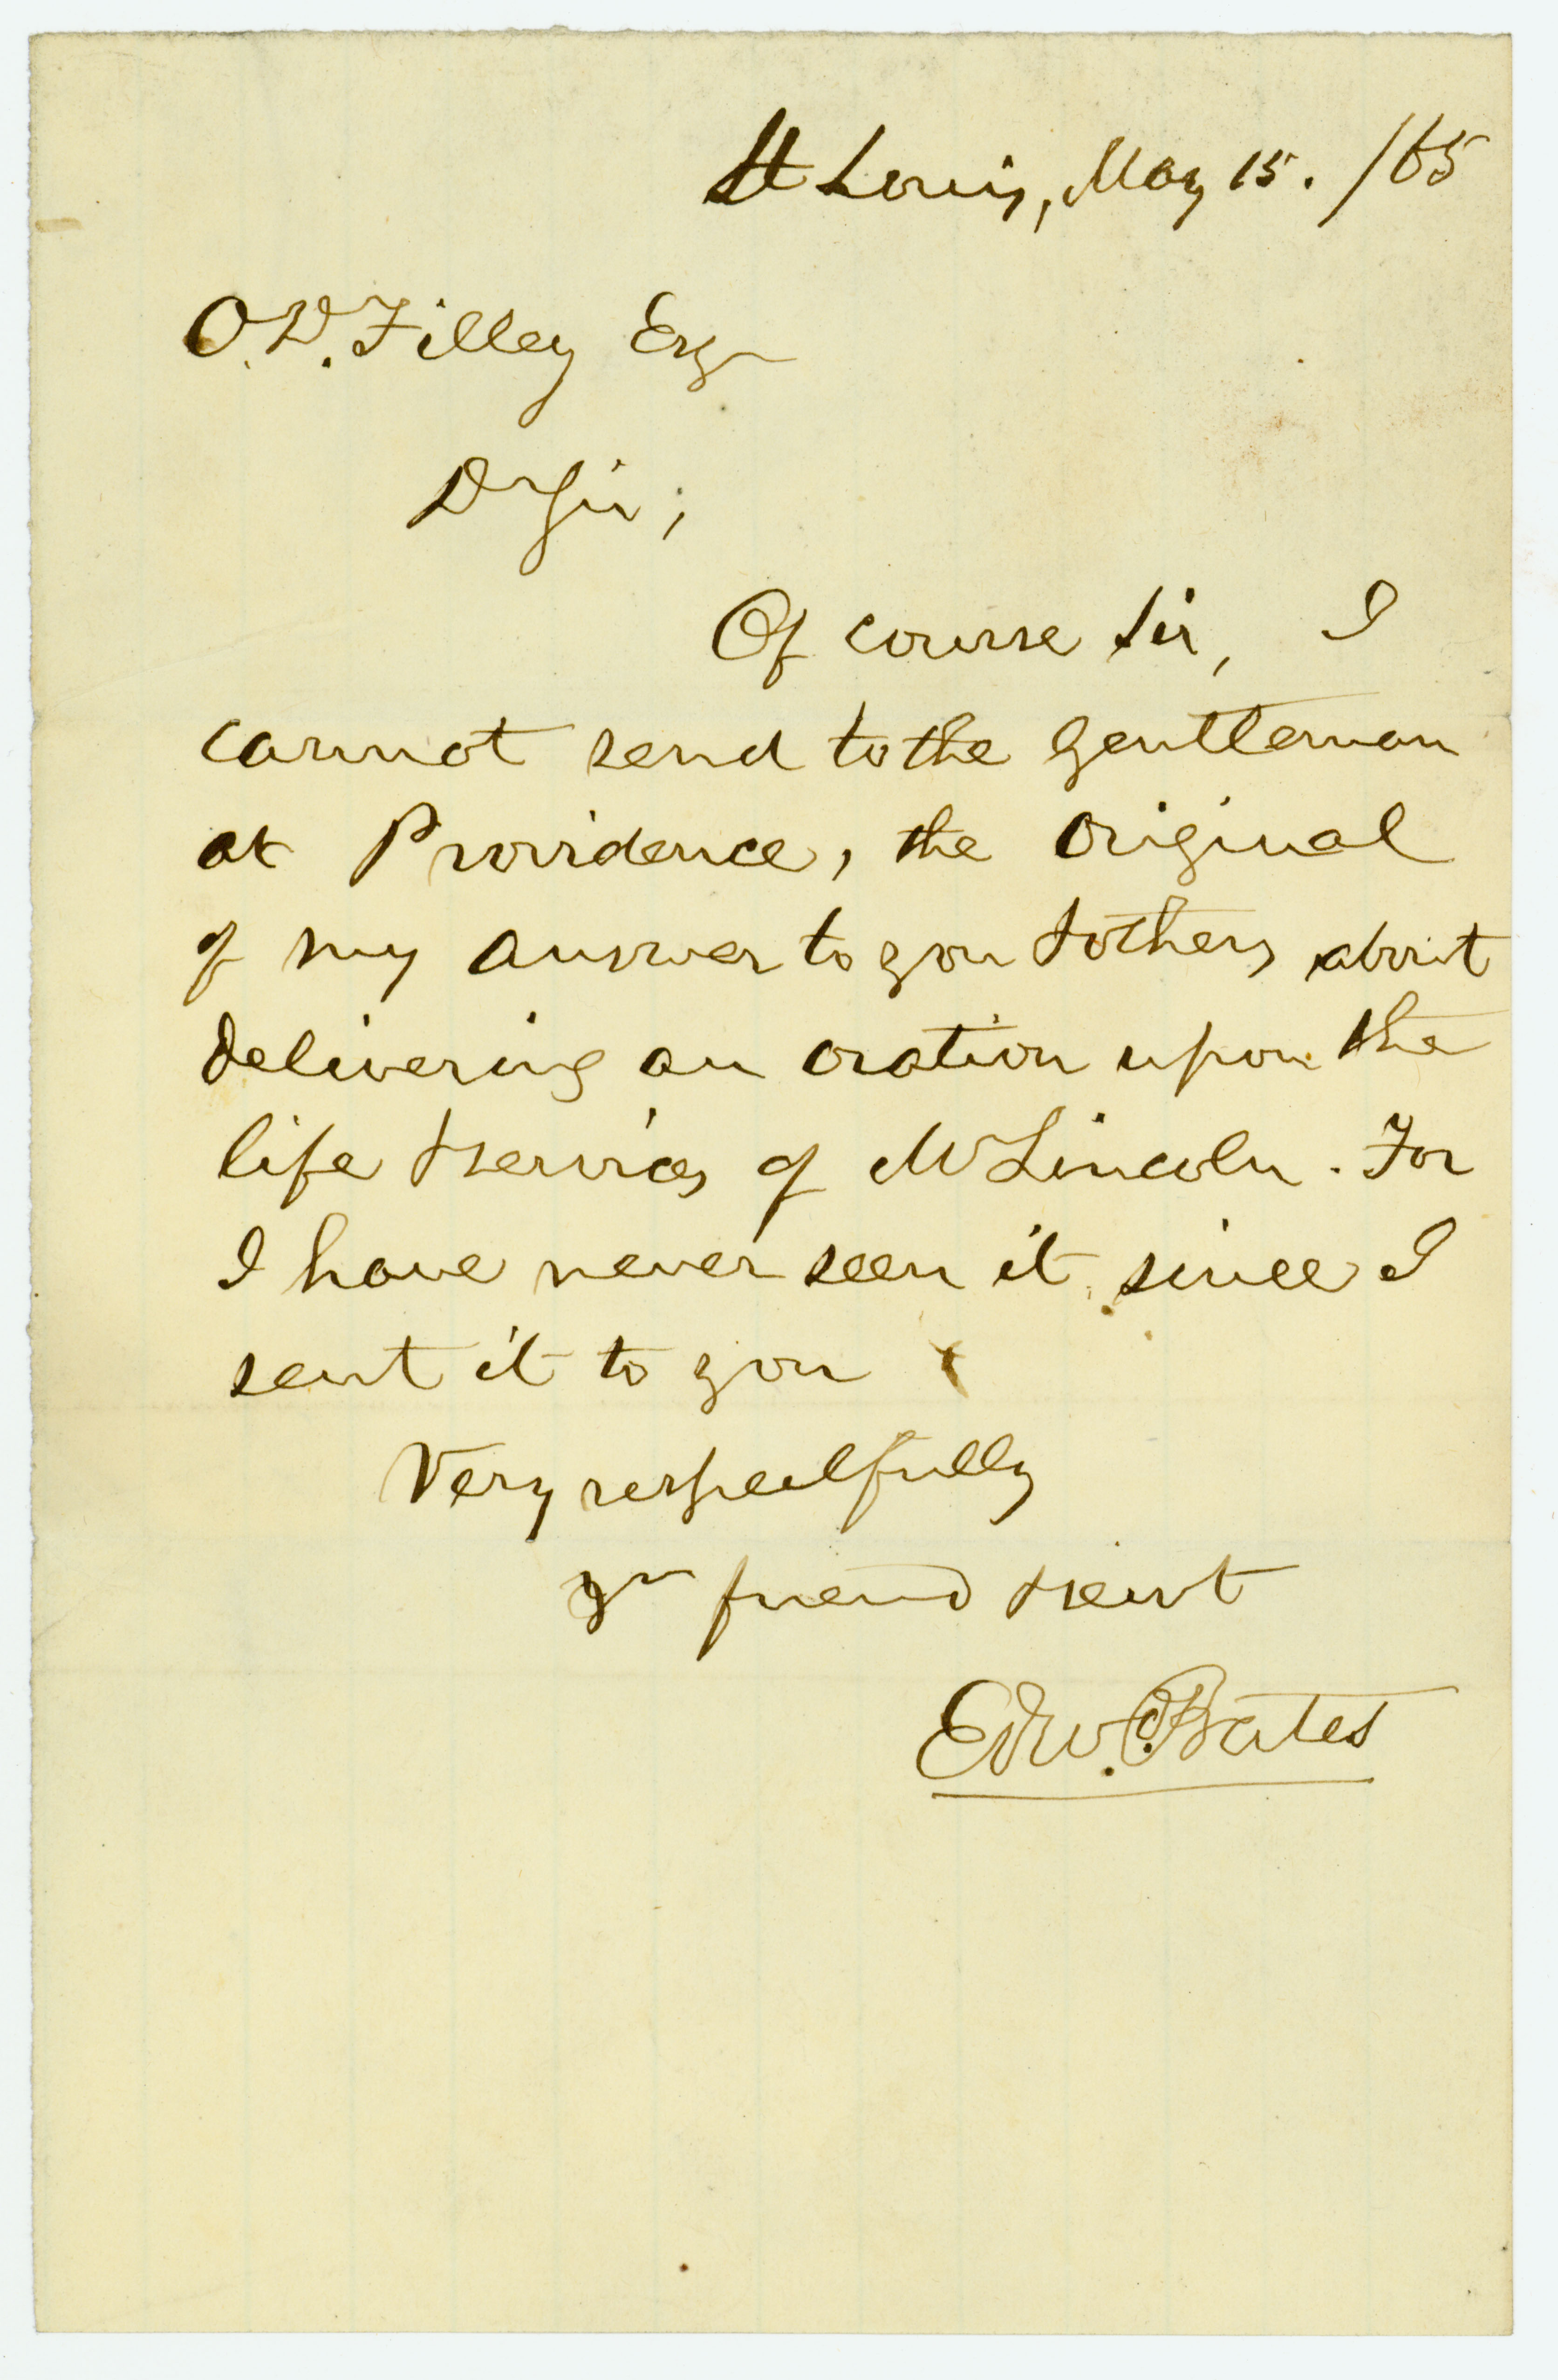 Note of Edward Bates, St. Louis, to O. D. Filley, May 15, 1865